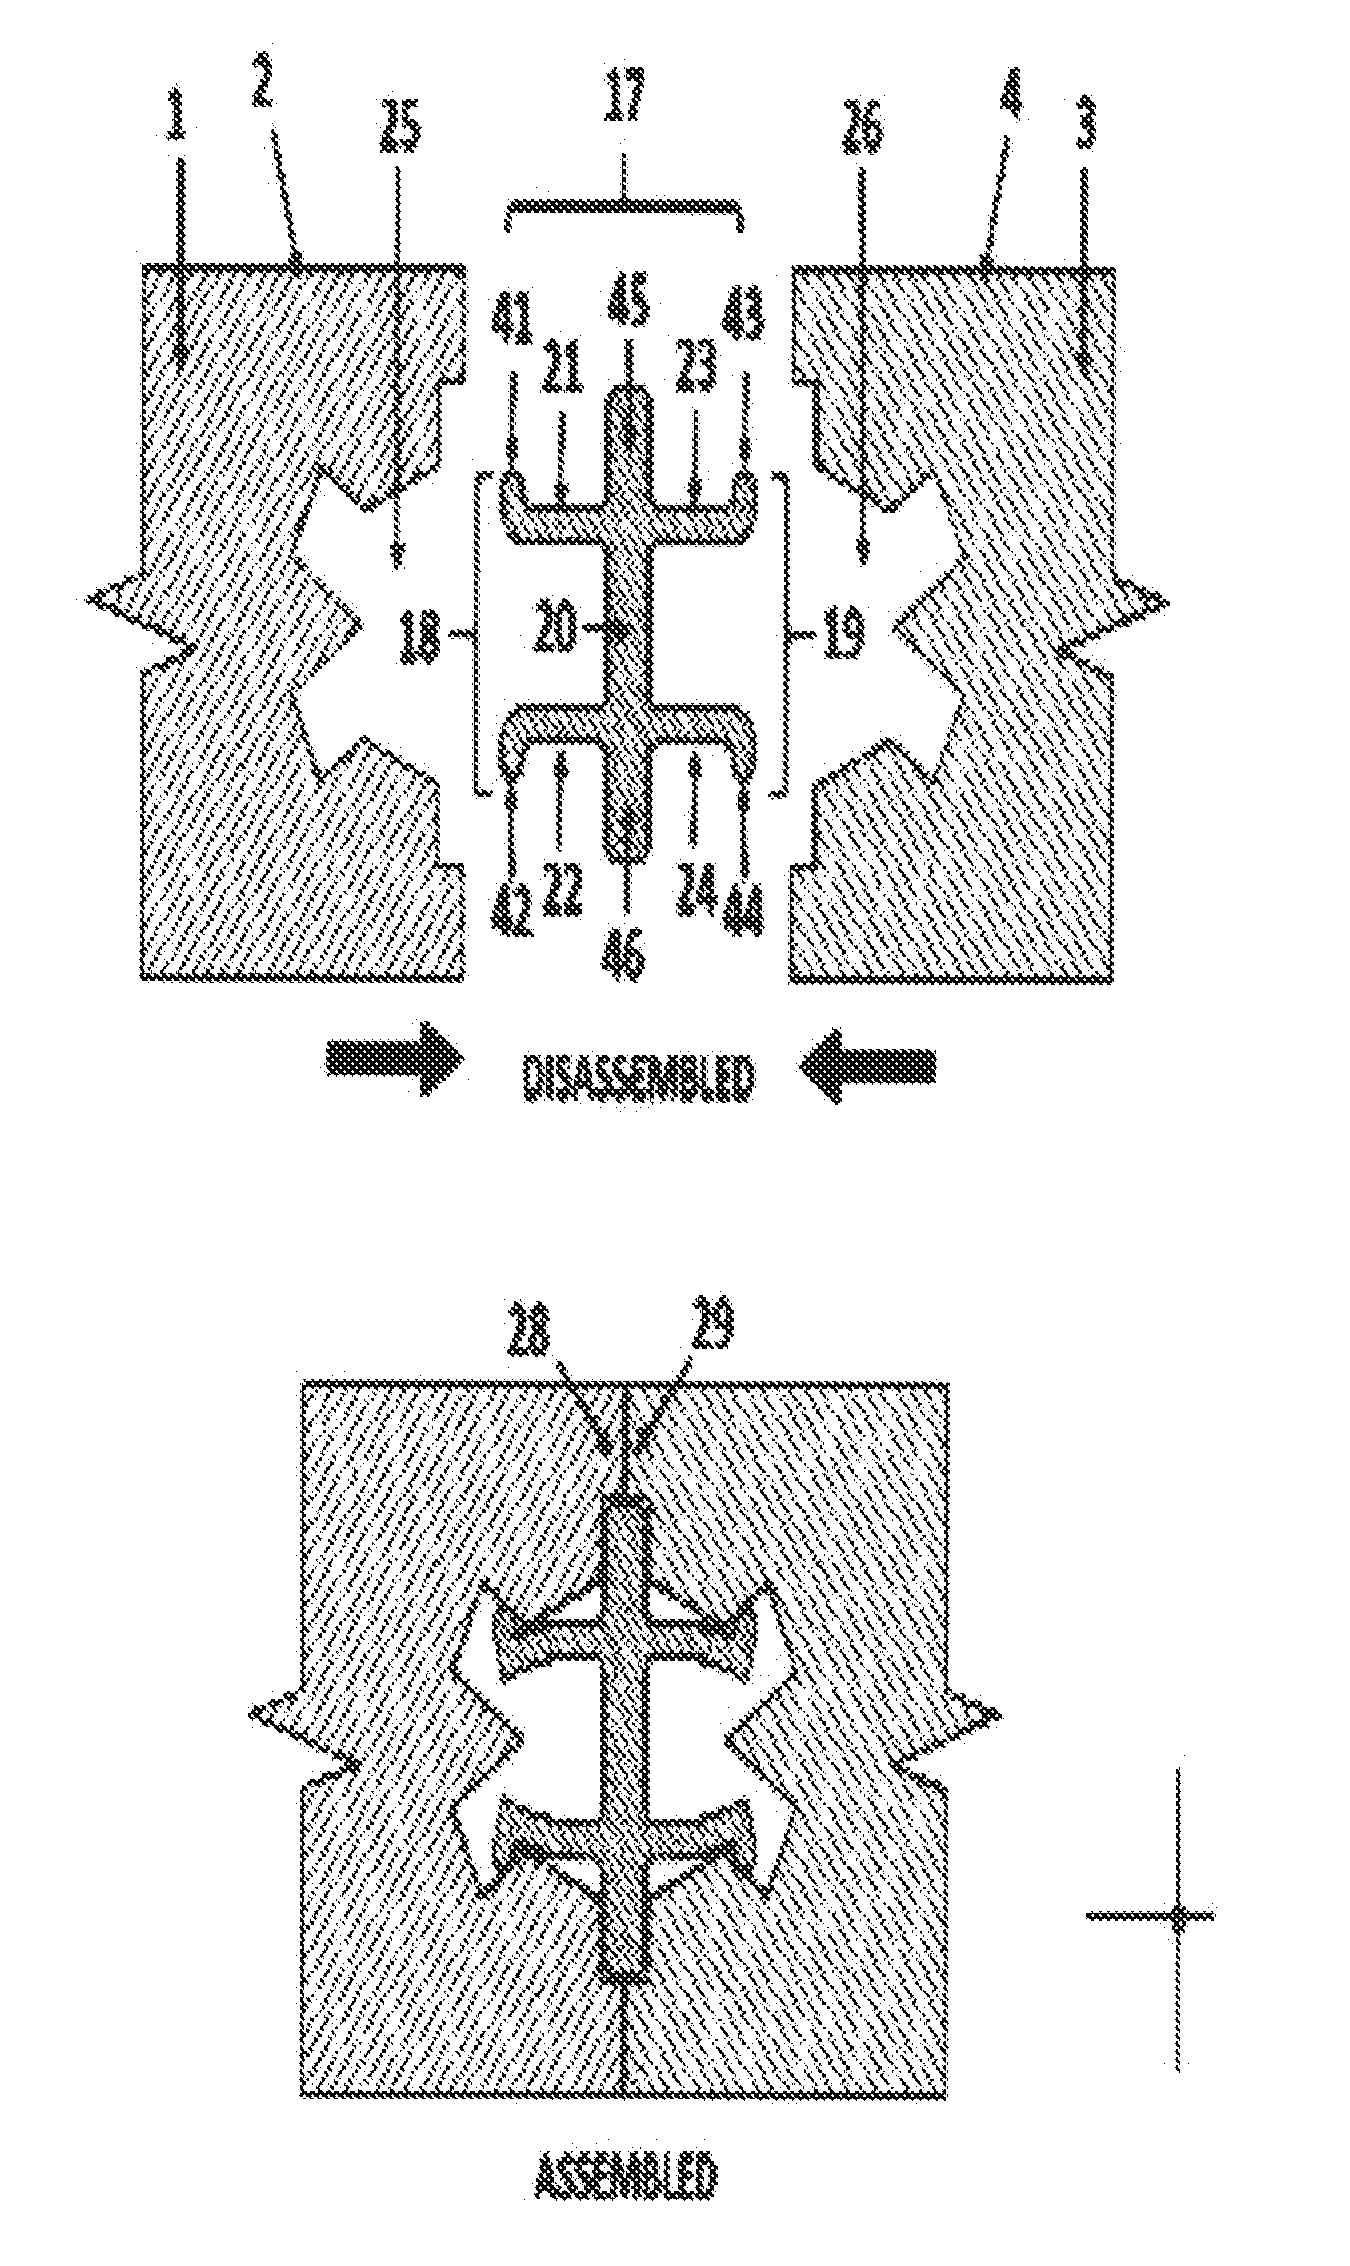 Spring-Loaded Split-Tongue Connector System